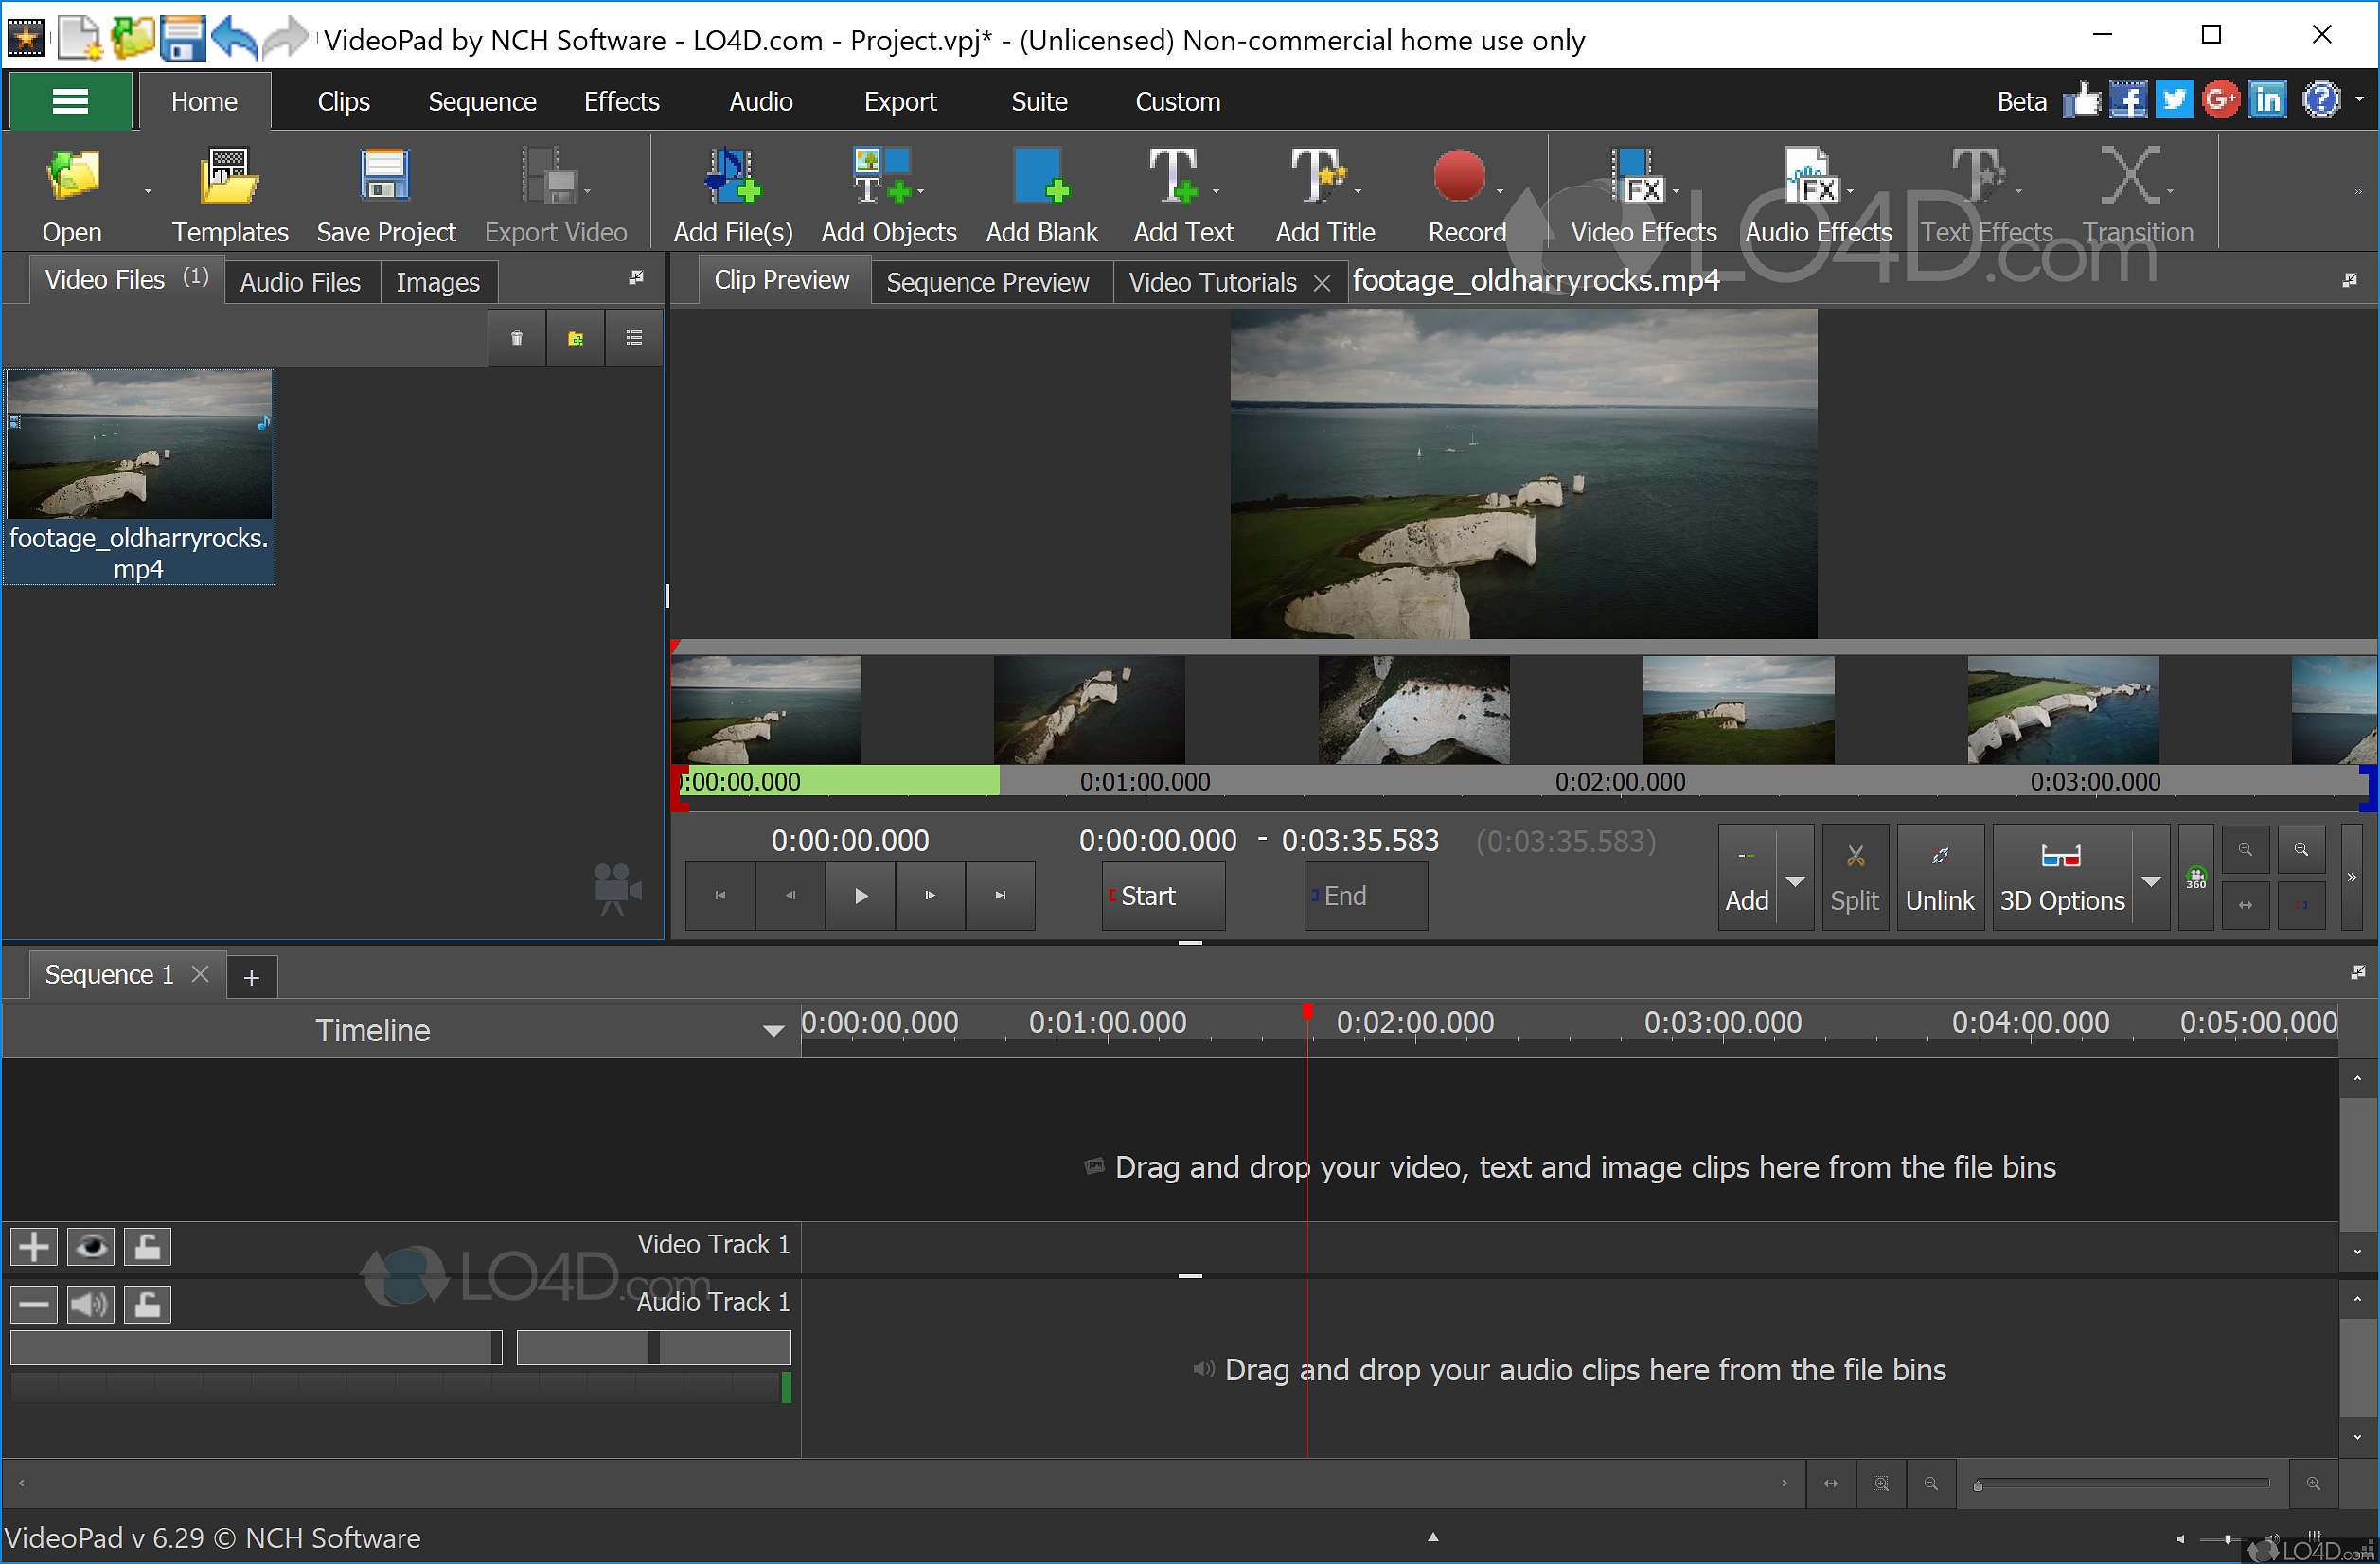 download the new for android NCH VideoPad Video Editor Pro 13.67